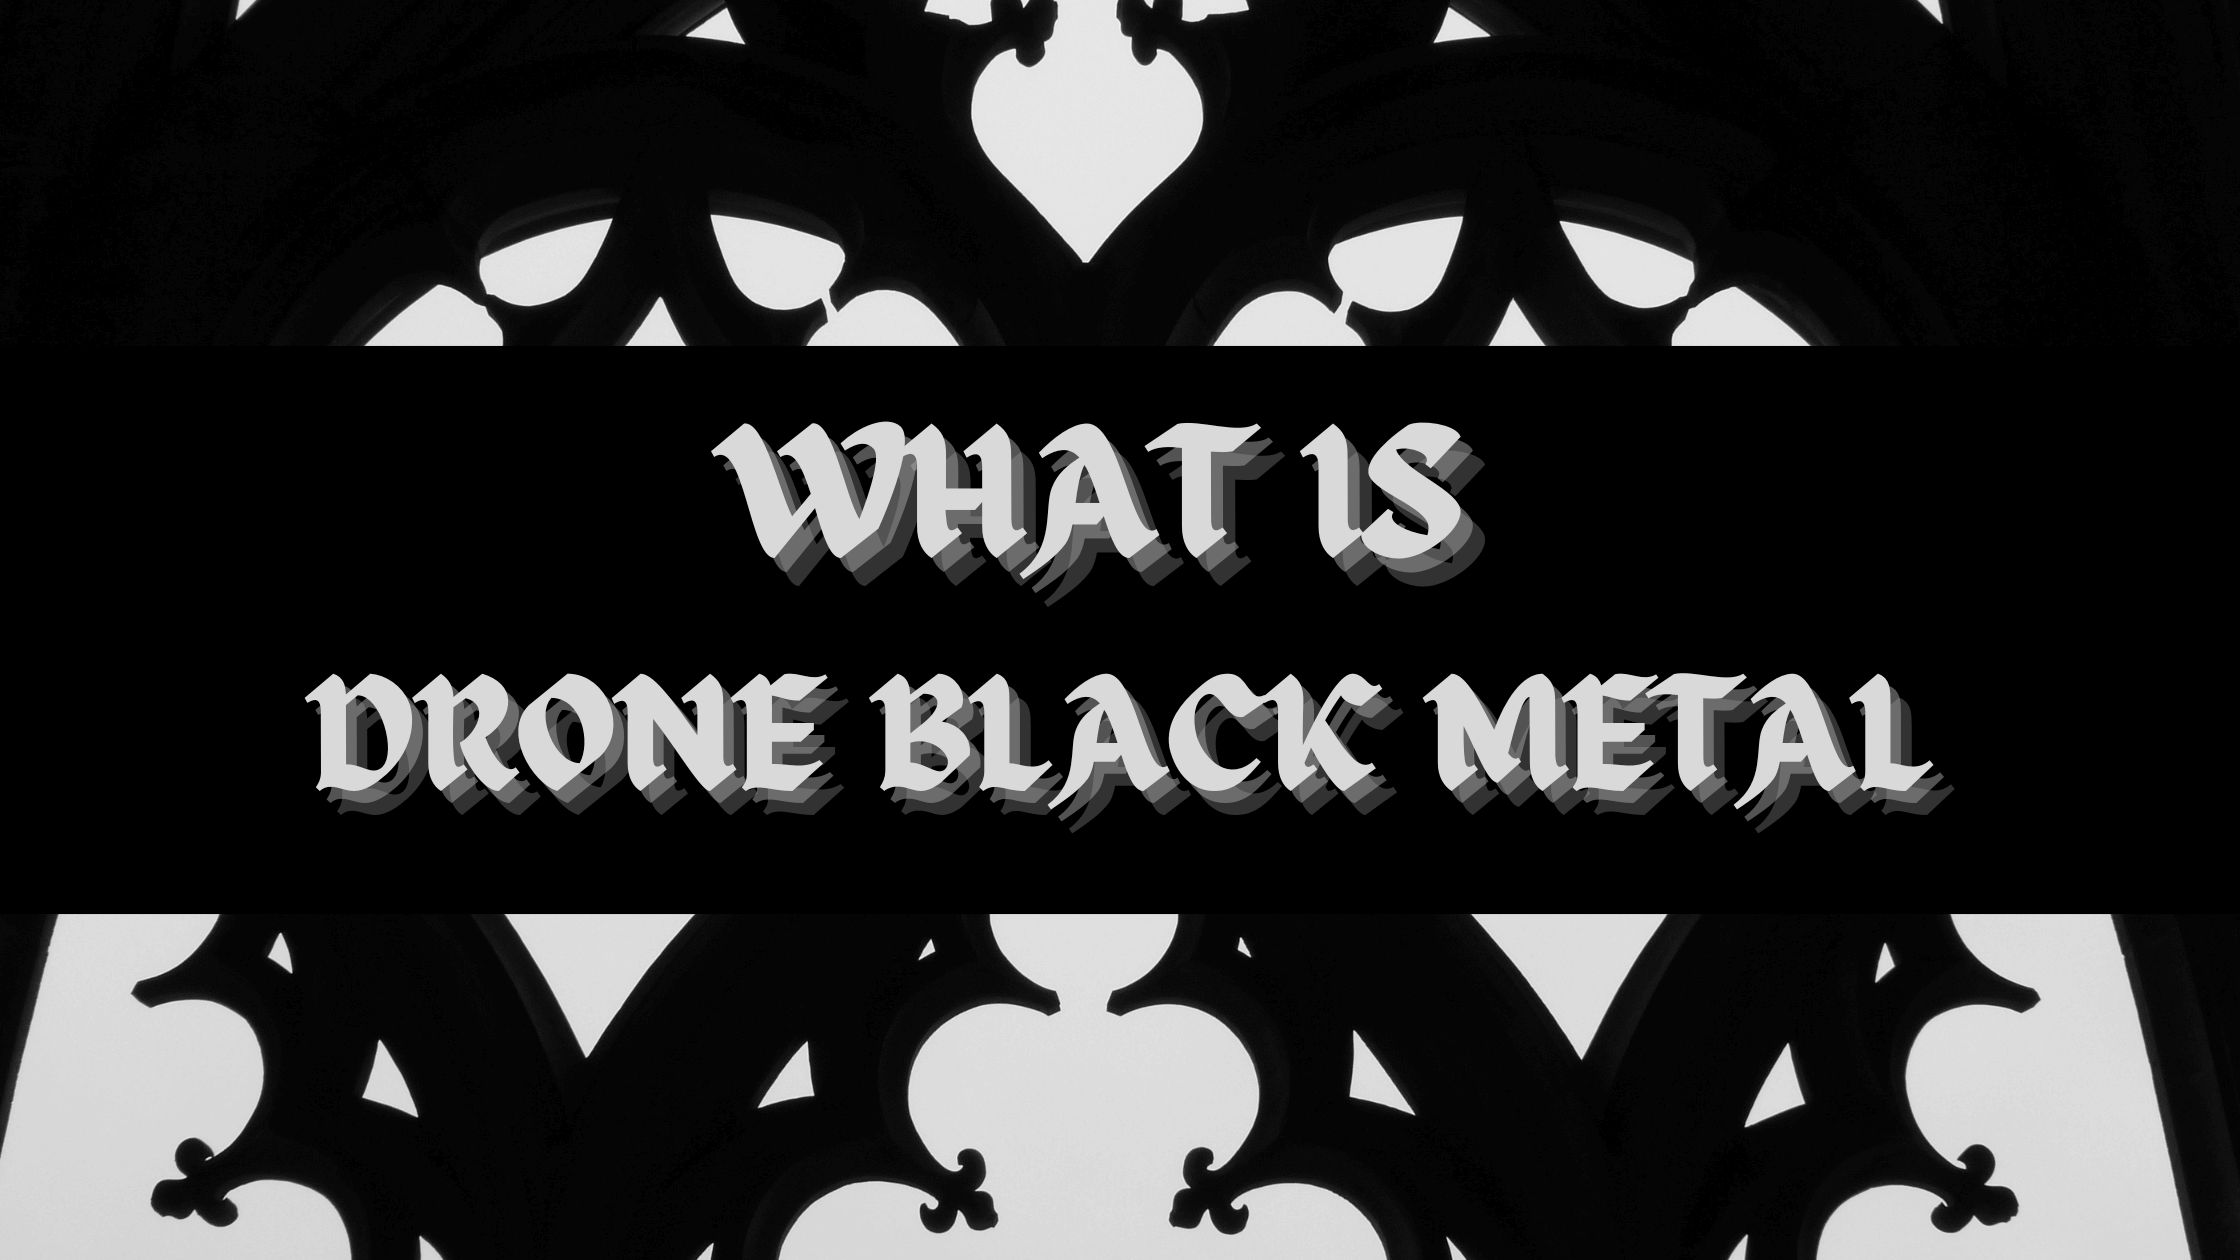 What is Drone Metal: features, bands, albums, songs and lyric themes